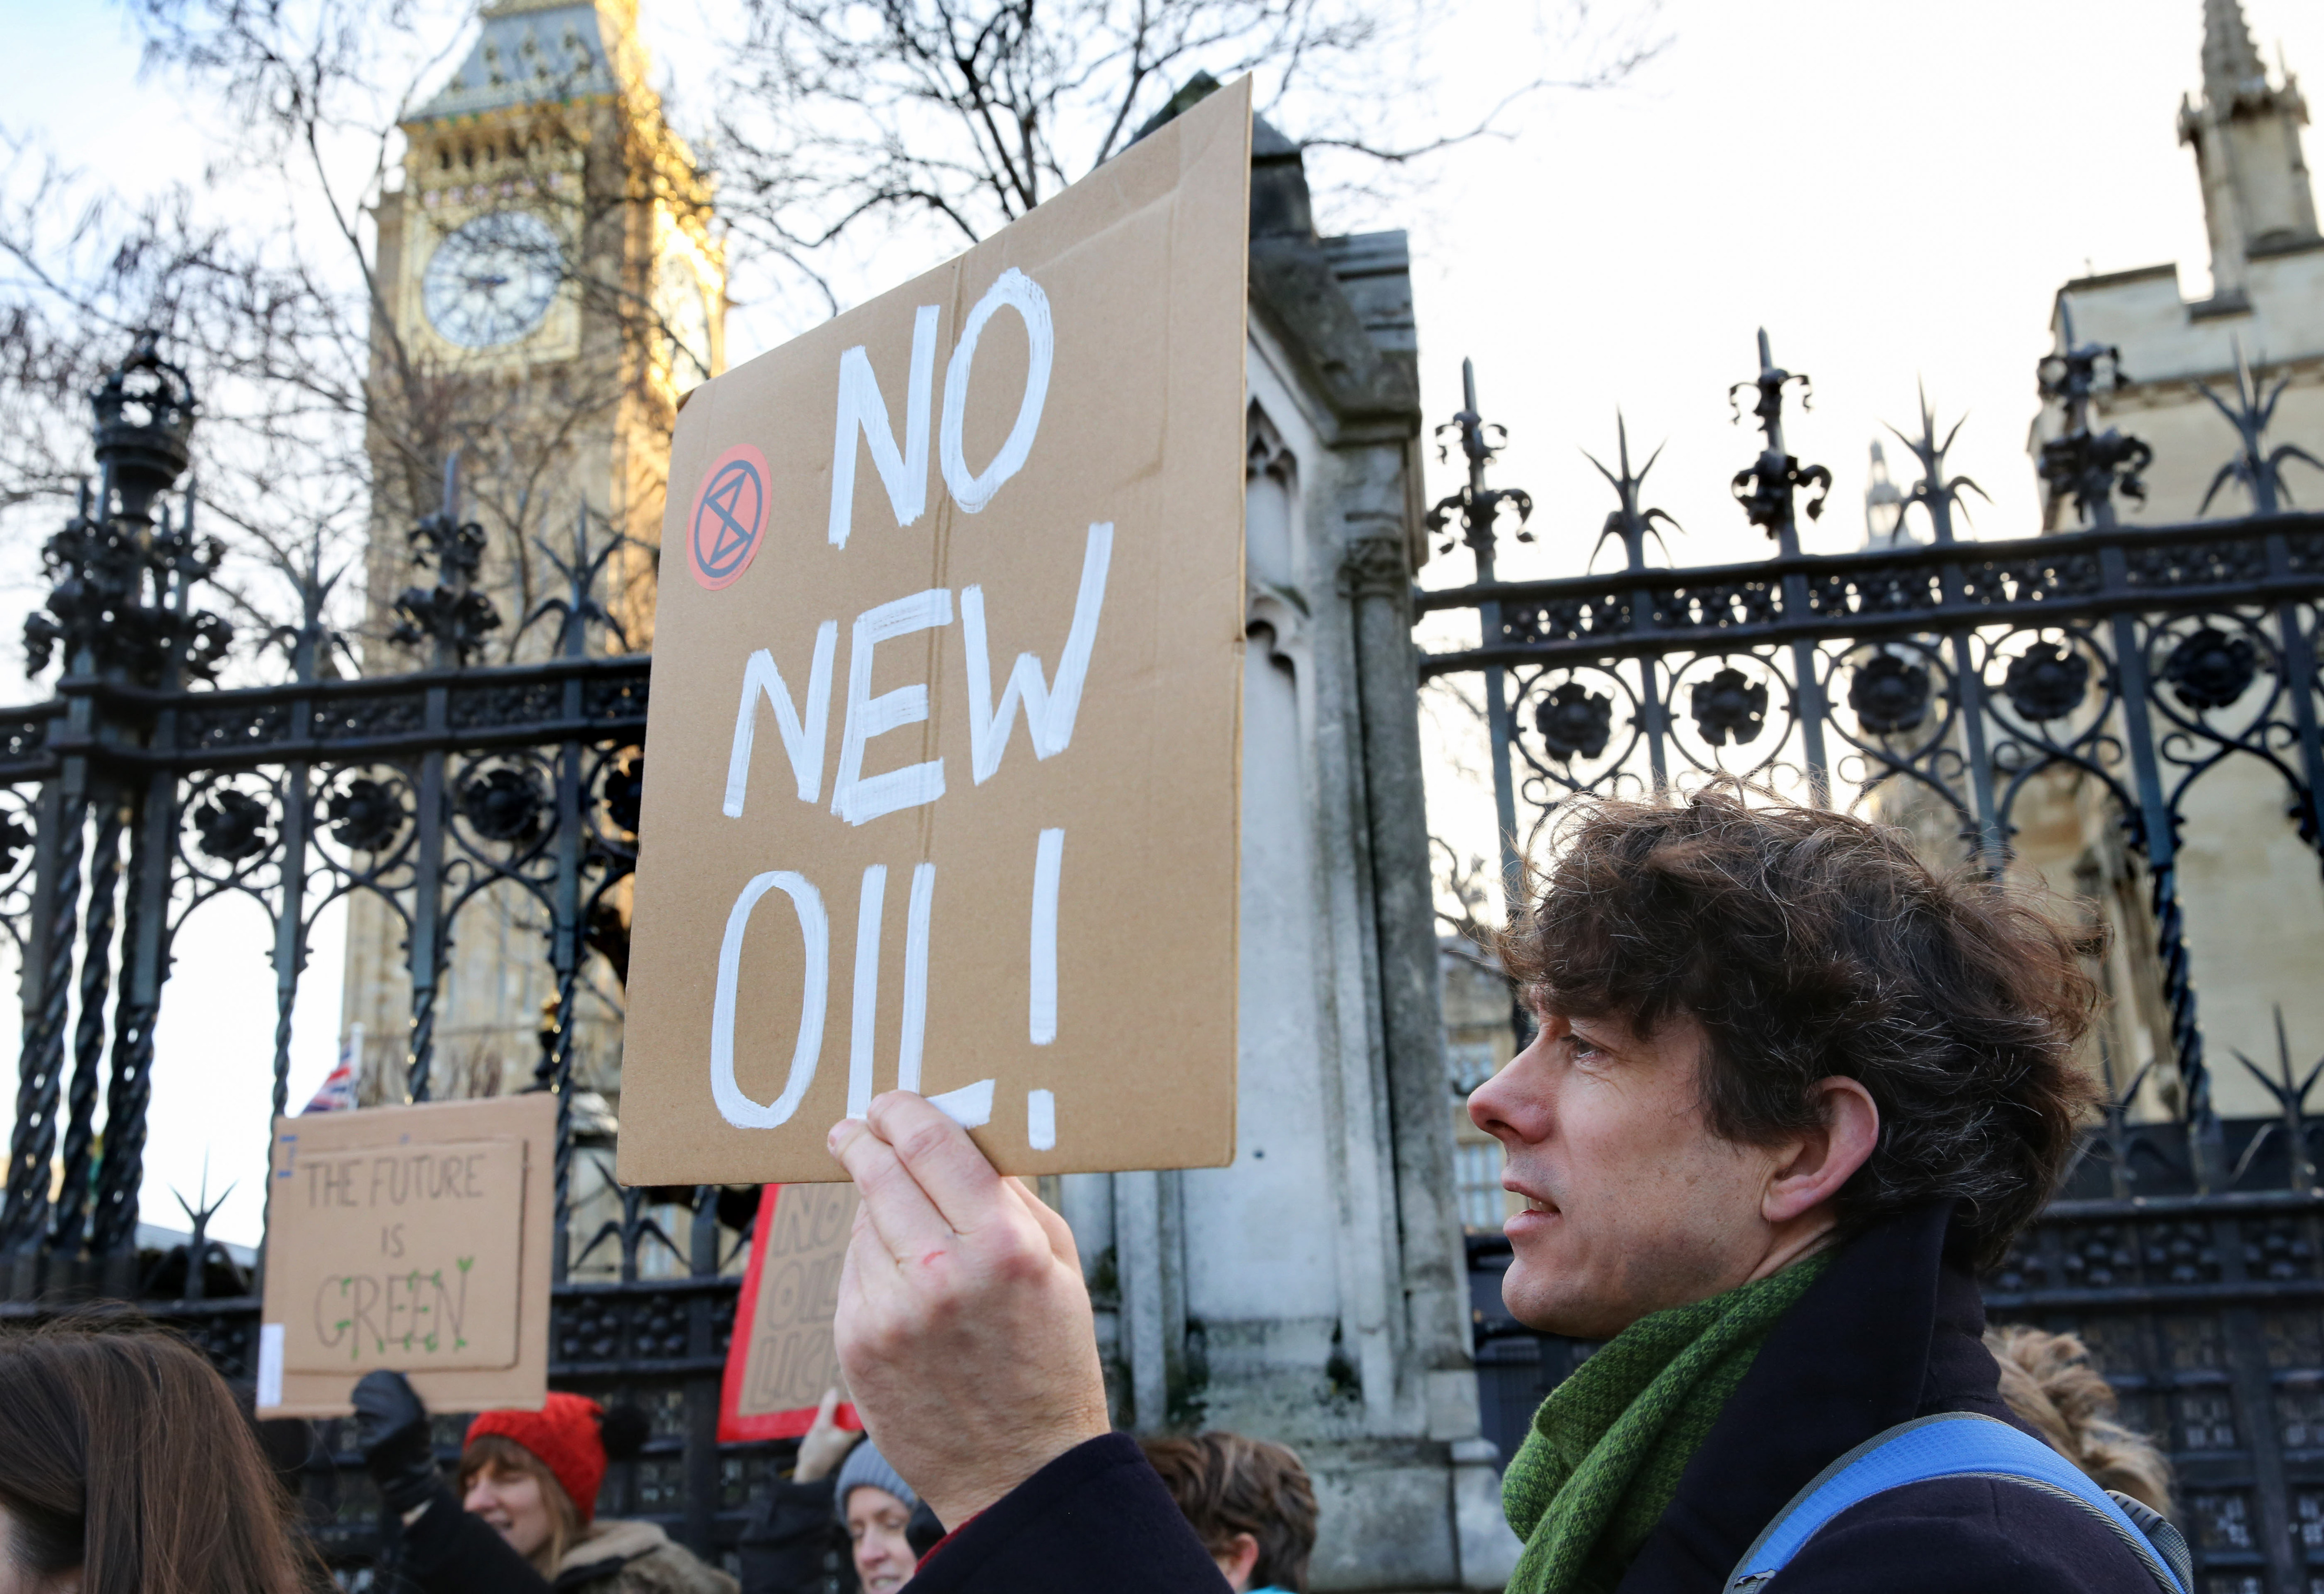 A protester holds a placard reading “No New Oil” outside the House of Parliament in London.